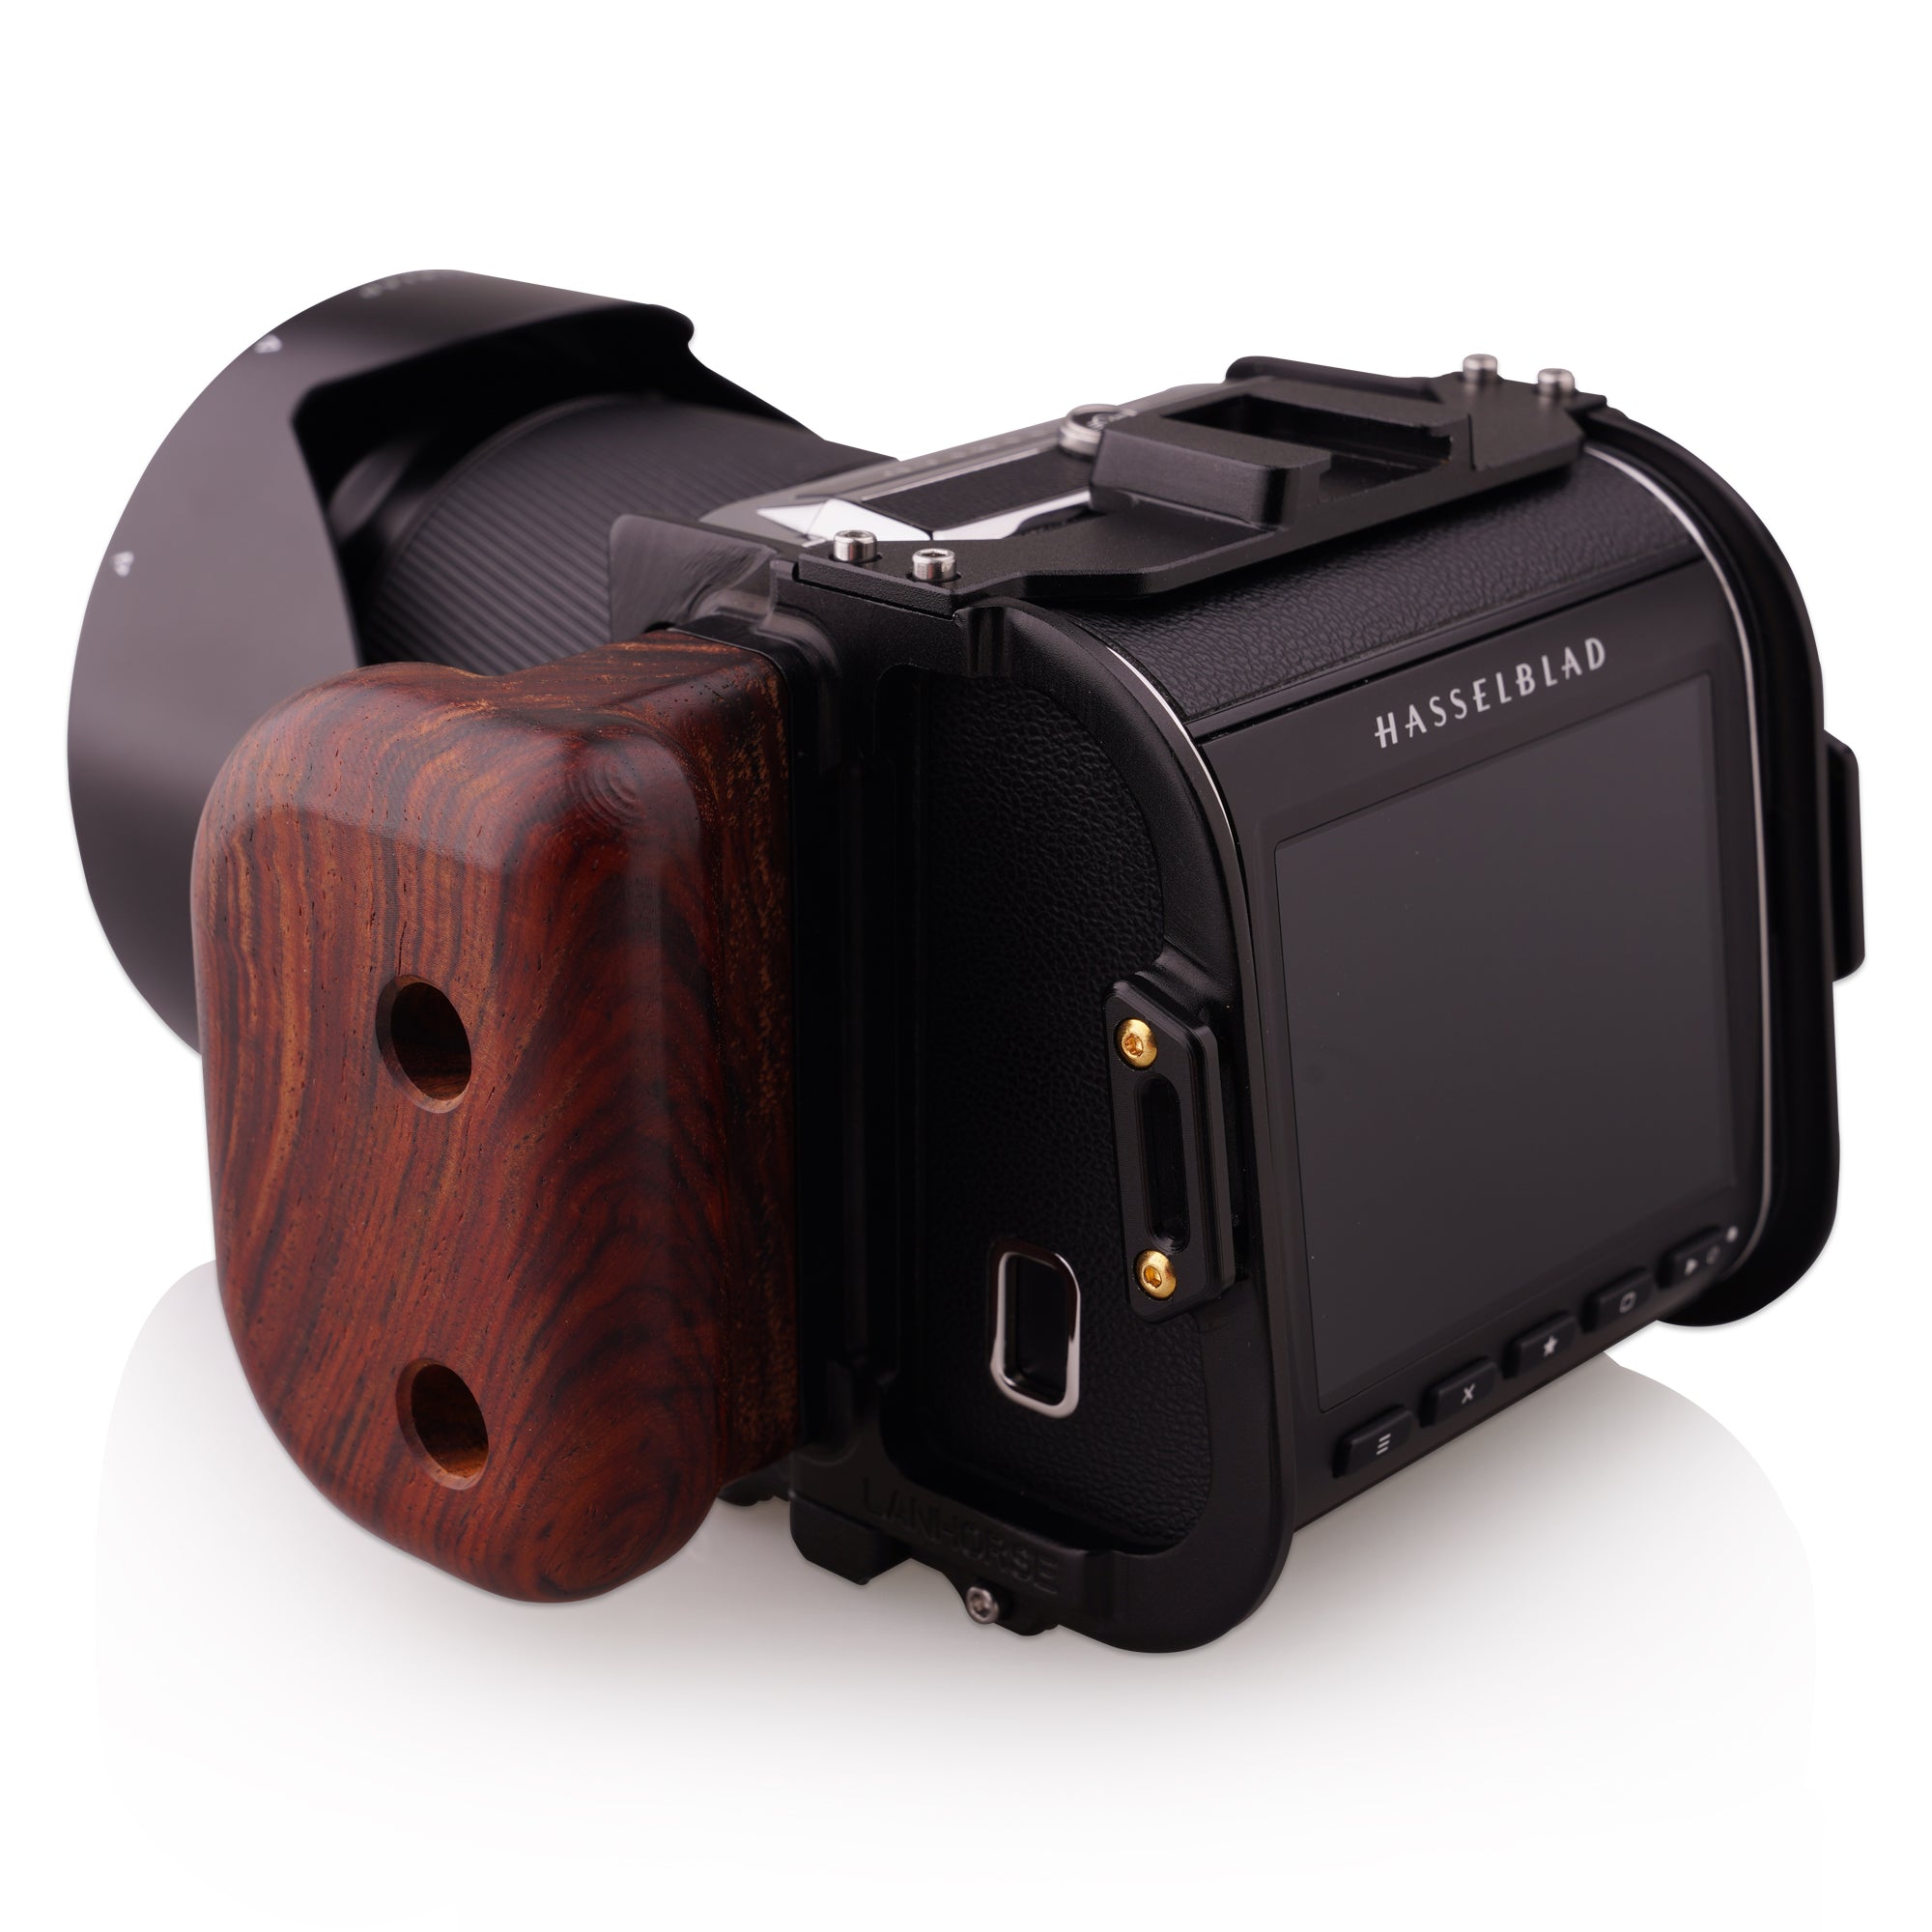 Lanhorse Camera Cage for Hasselblad 907x with Rosewood Handgrip. 2nd Generation. Ultra-thin, ultra-light, portable.